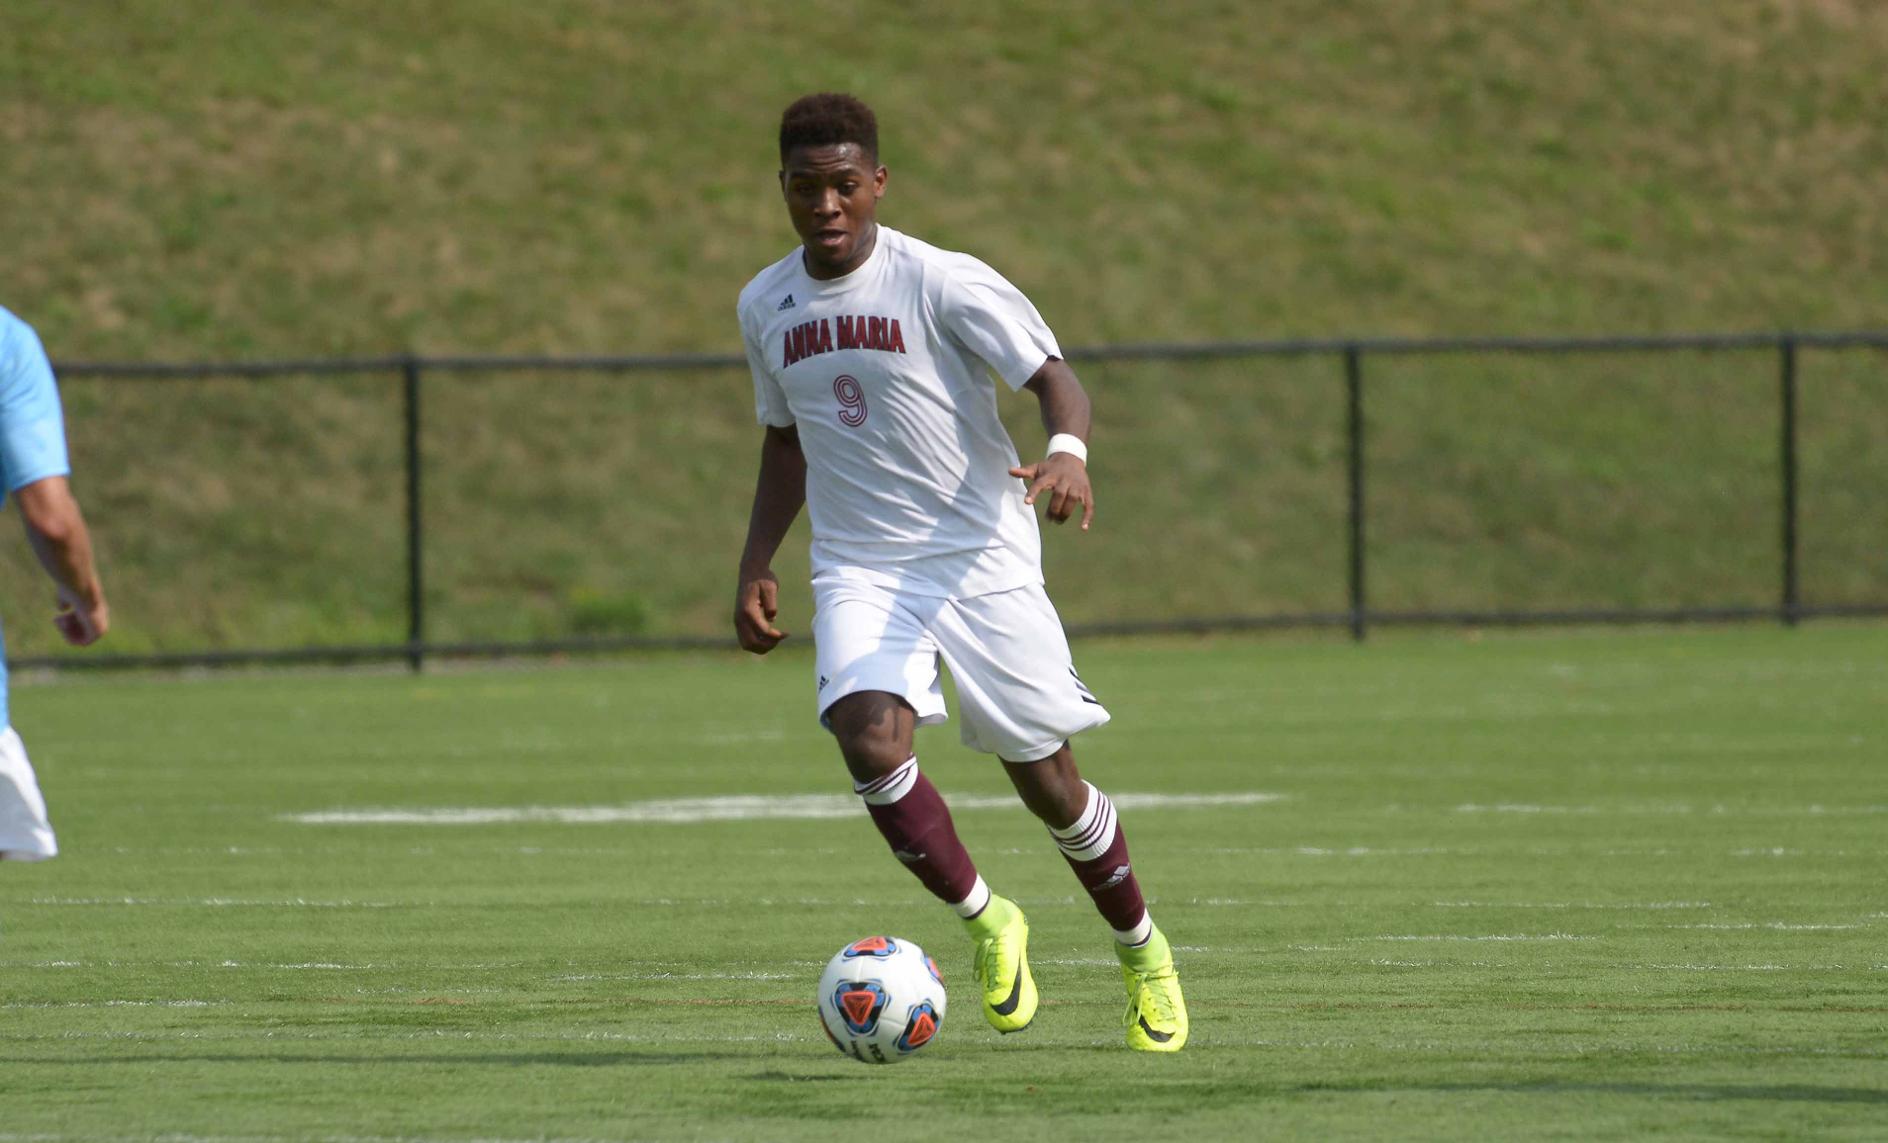 Rams Charge to 4-1 Win over Men's Soccer